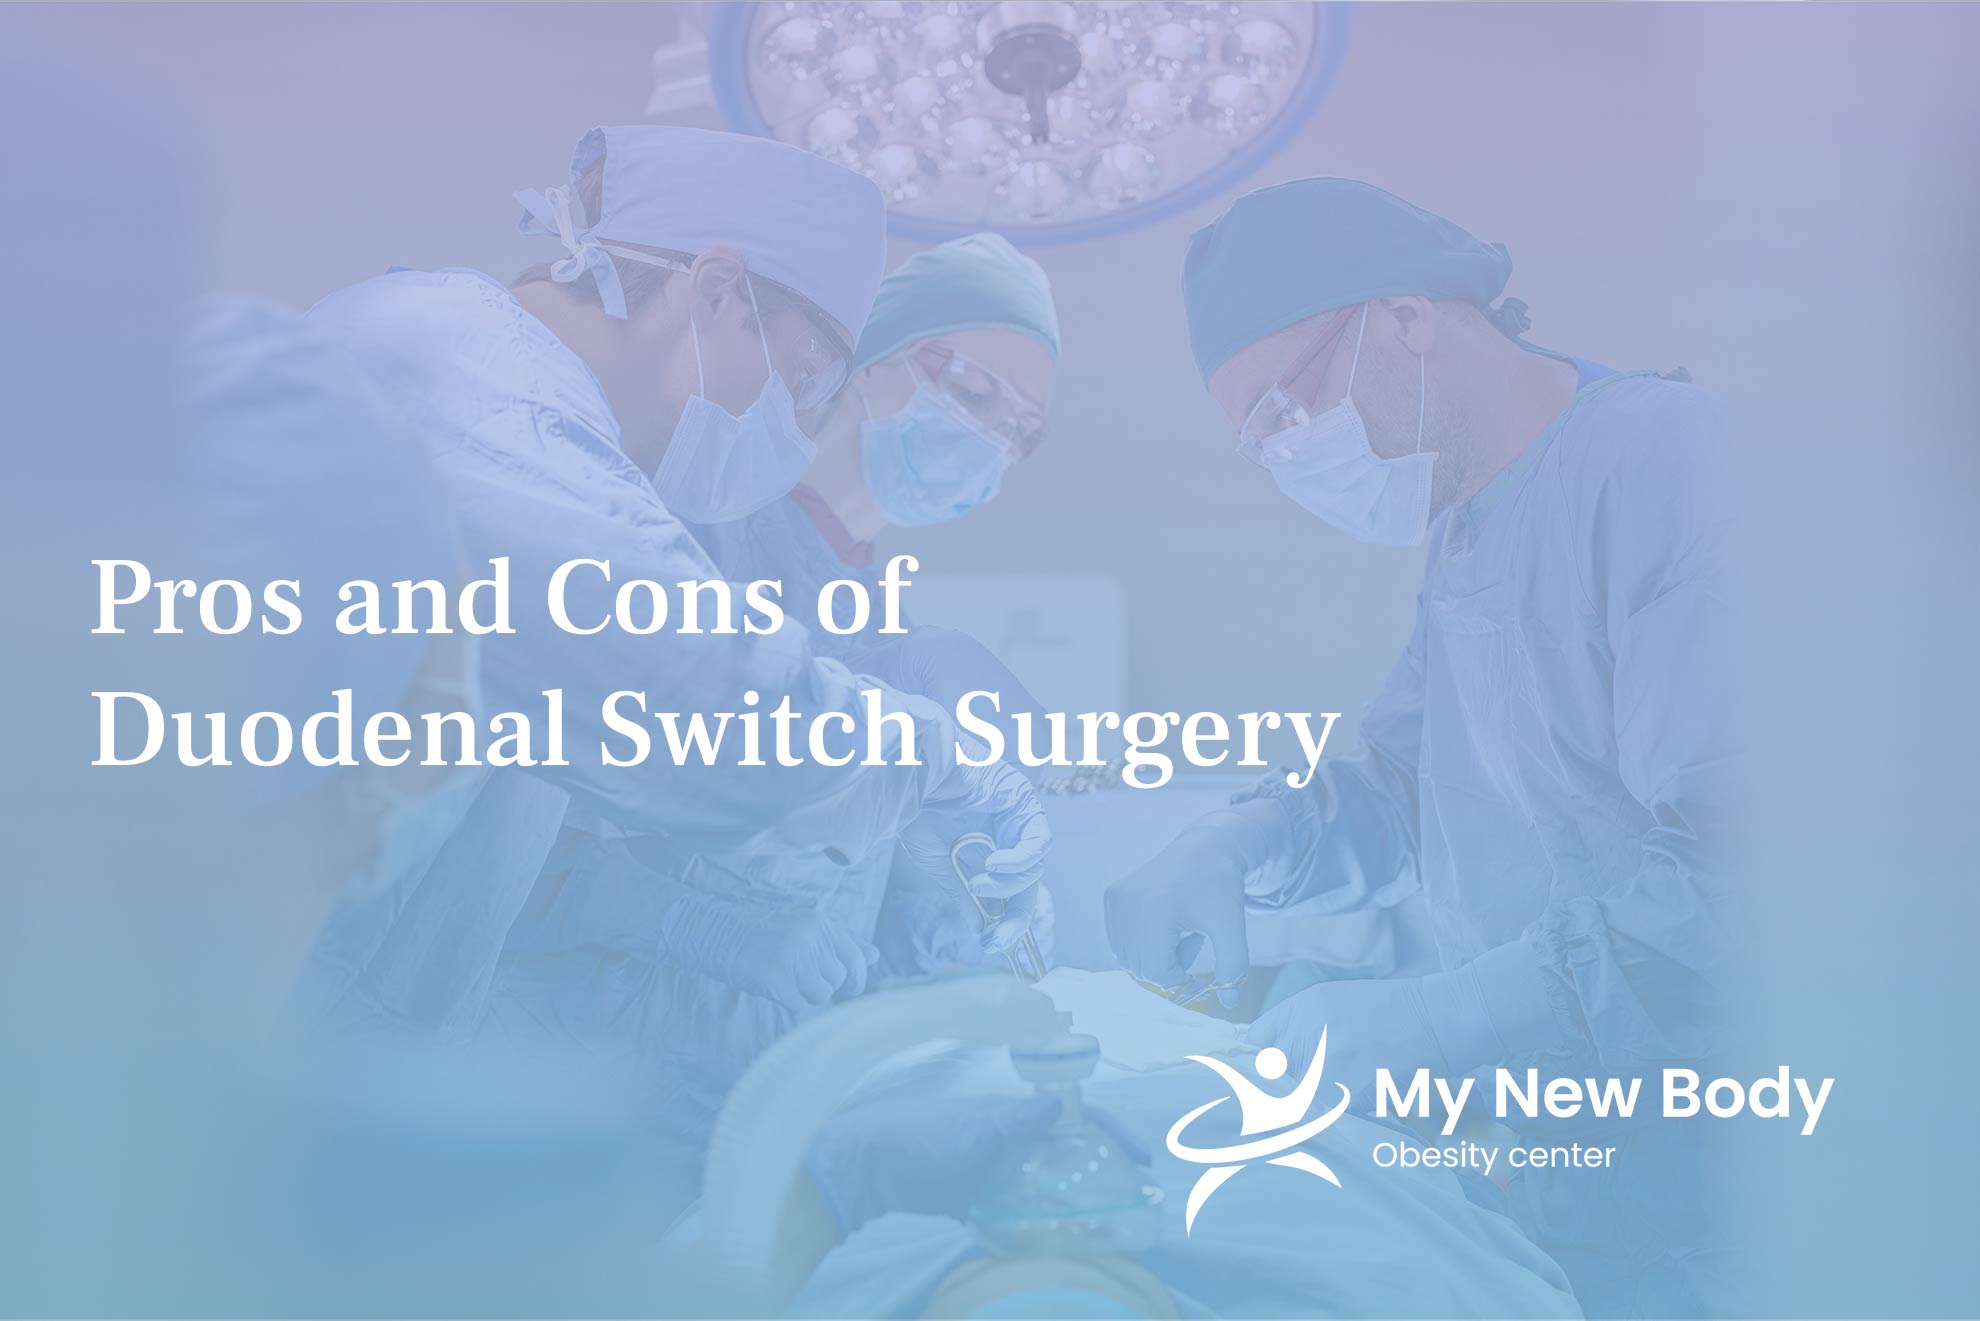 Pros and Cons of Duodenal Switch Surgery